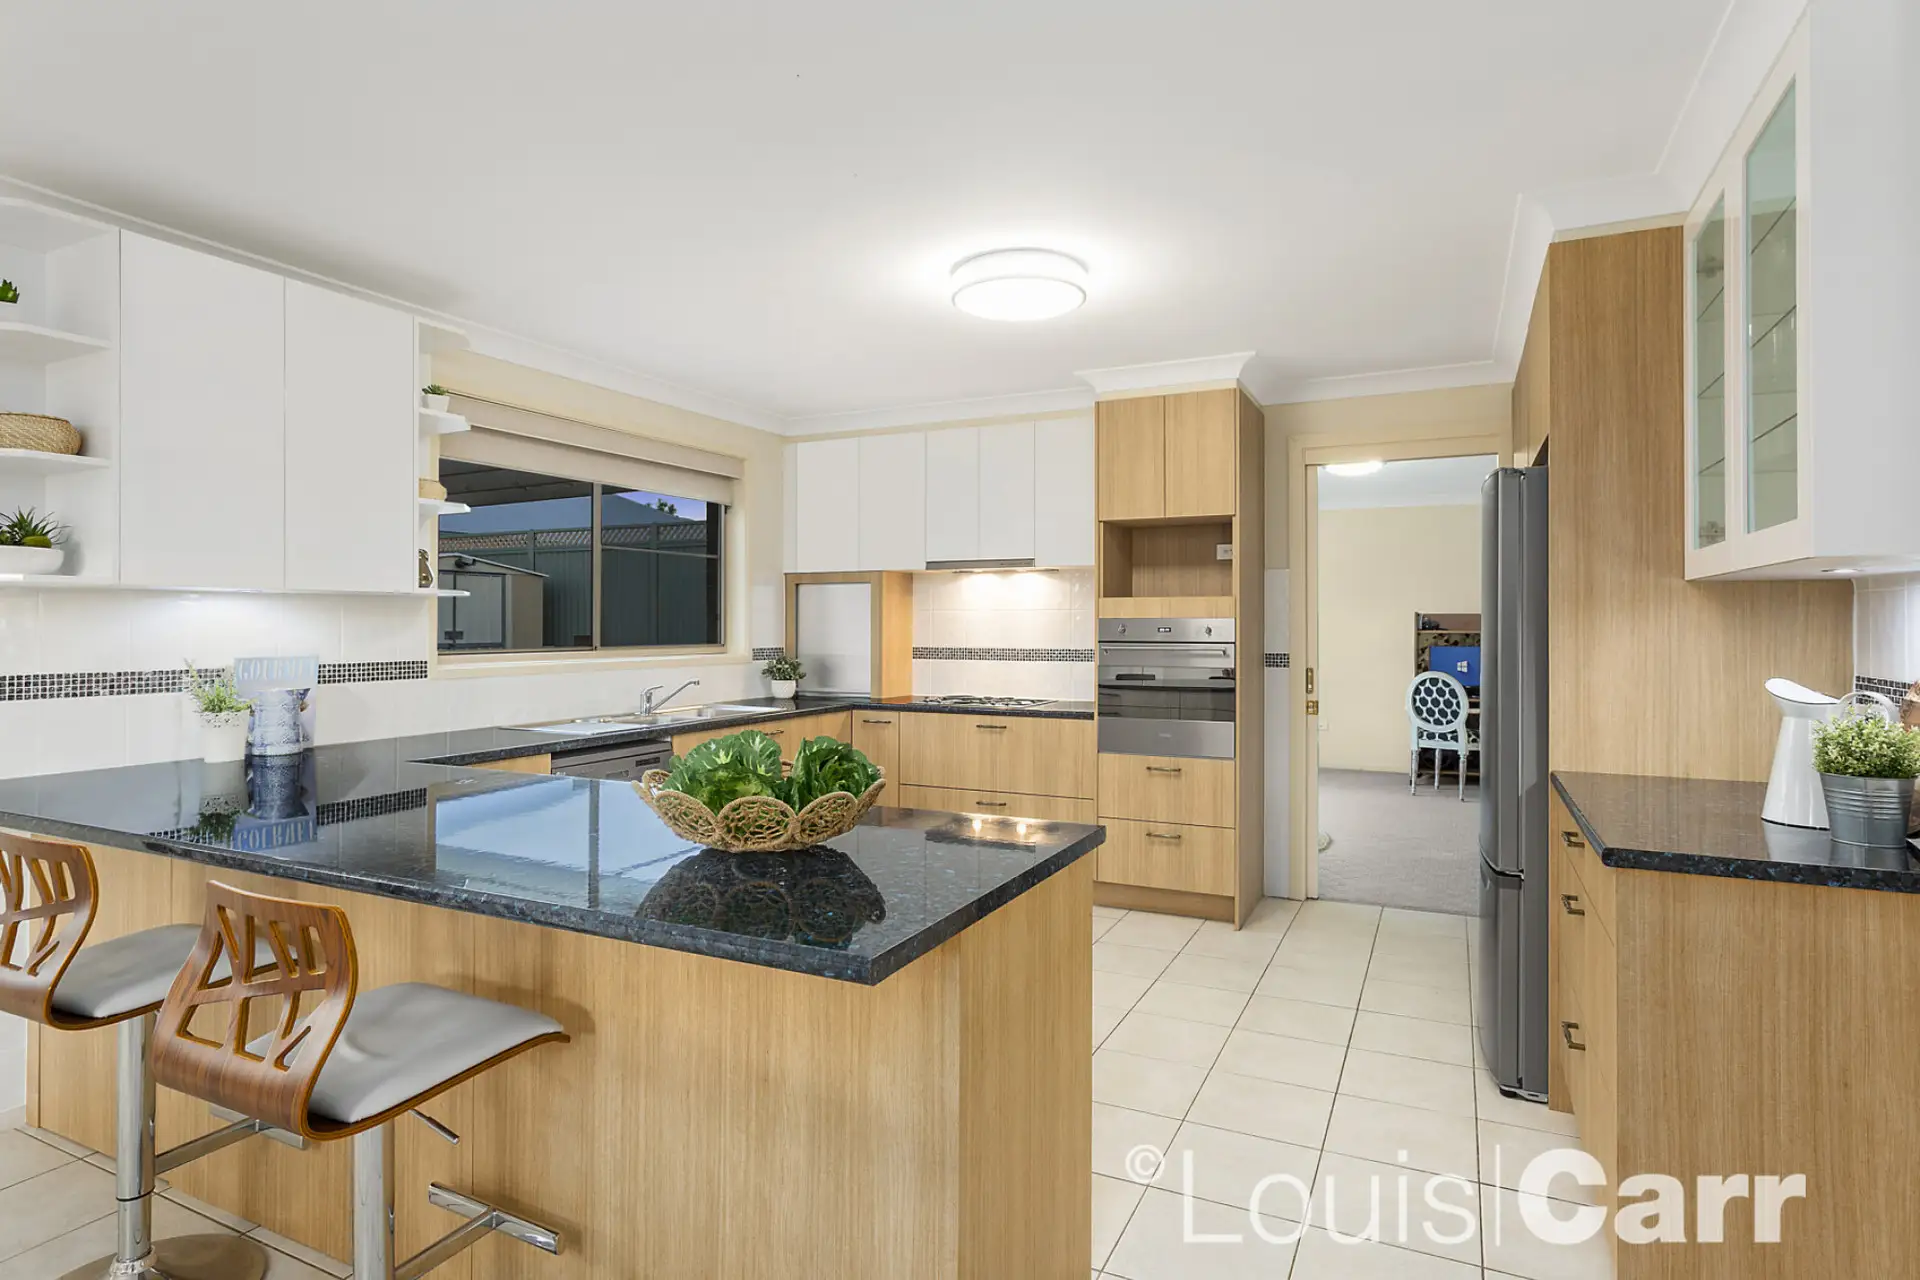 Photo #3: 85 Poole Road, Kellyville - Sold by Louis Carr Real Estate